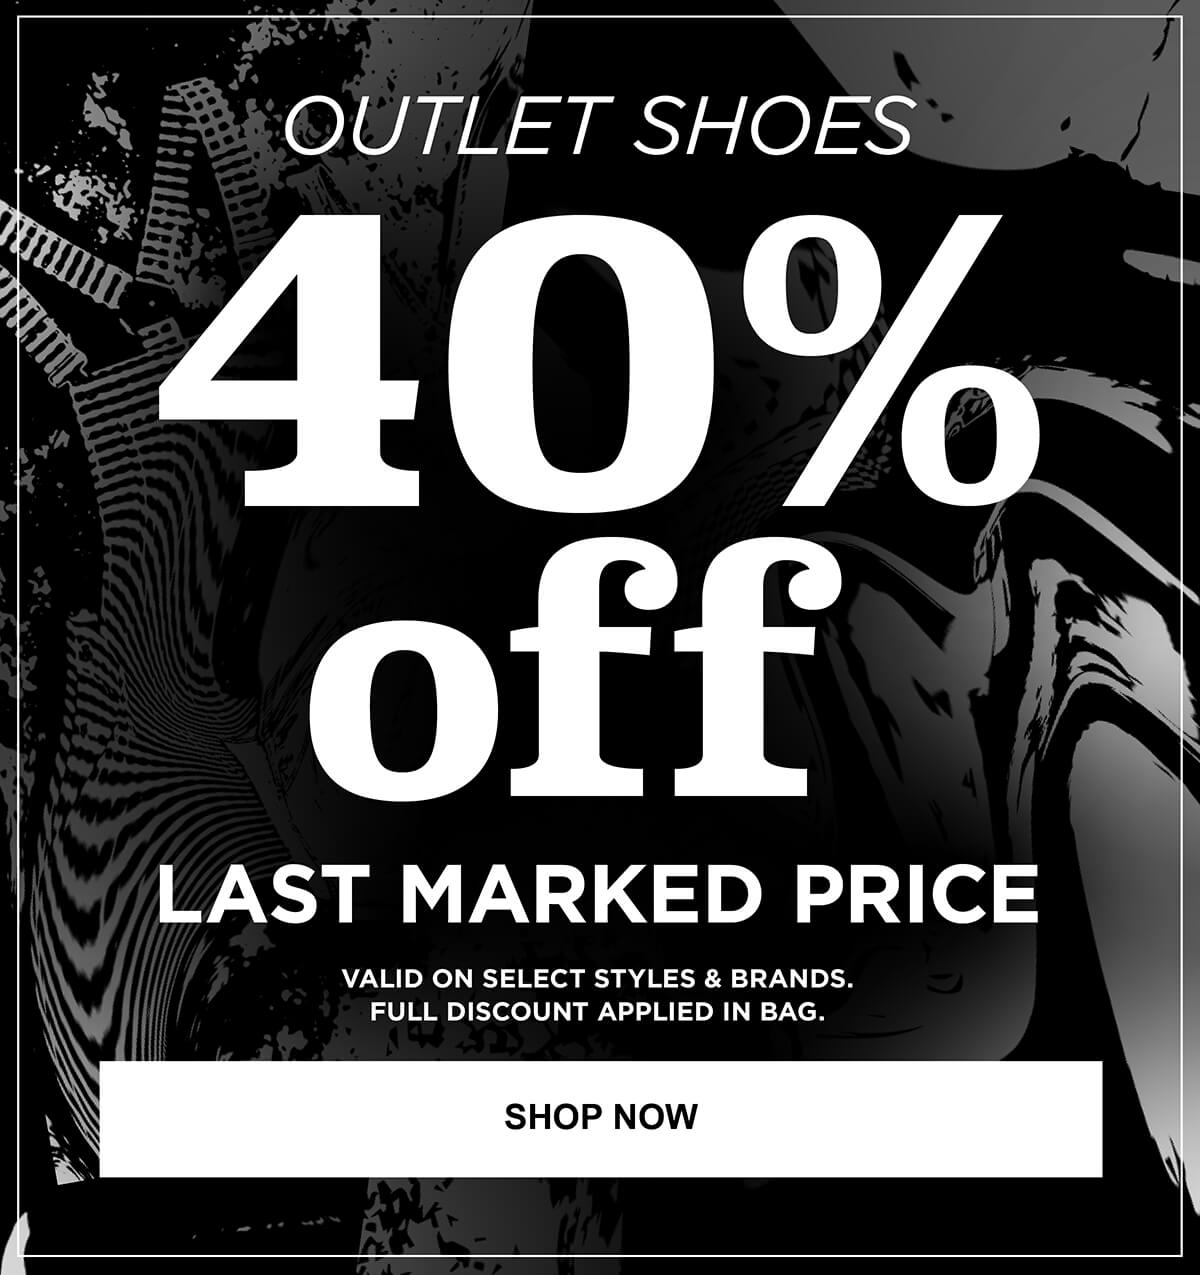 OUTLET SHOES - UP TO 70% OFF - SHOP NOW